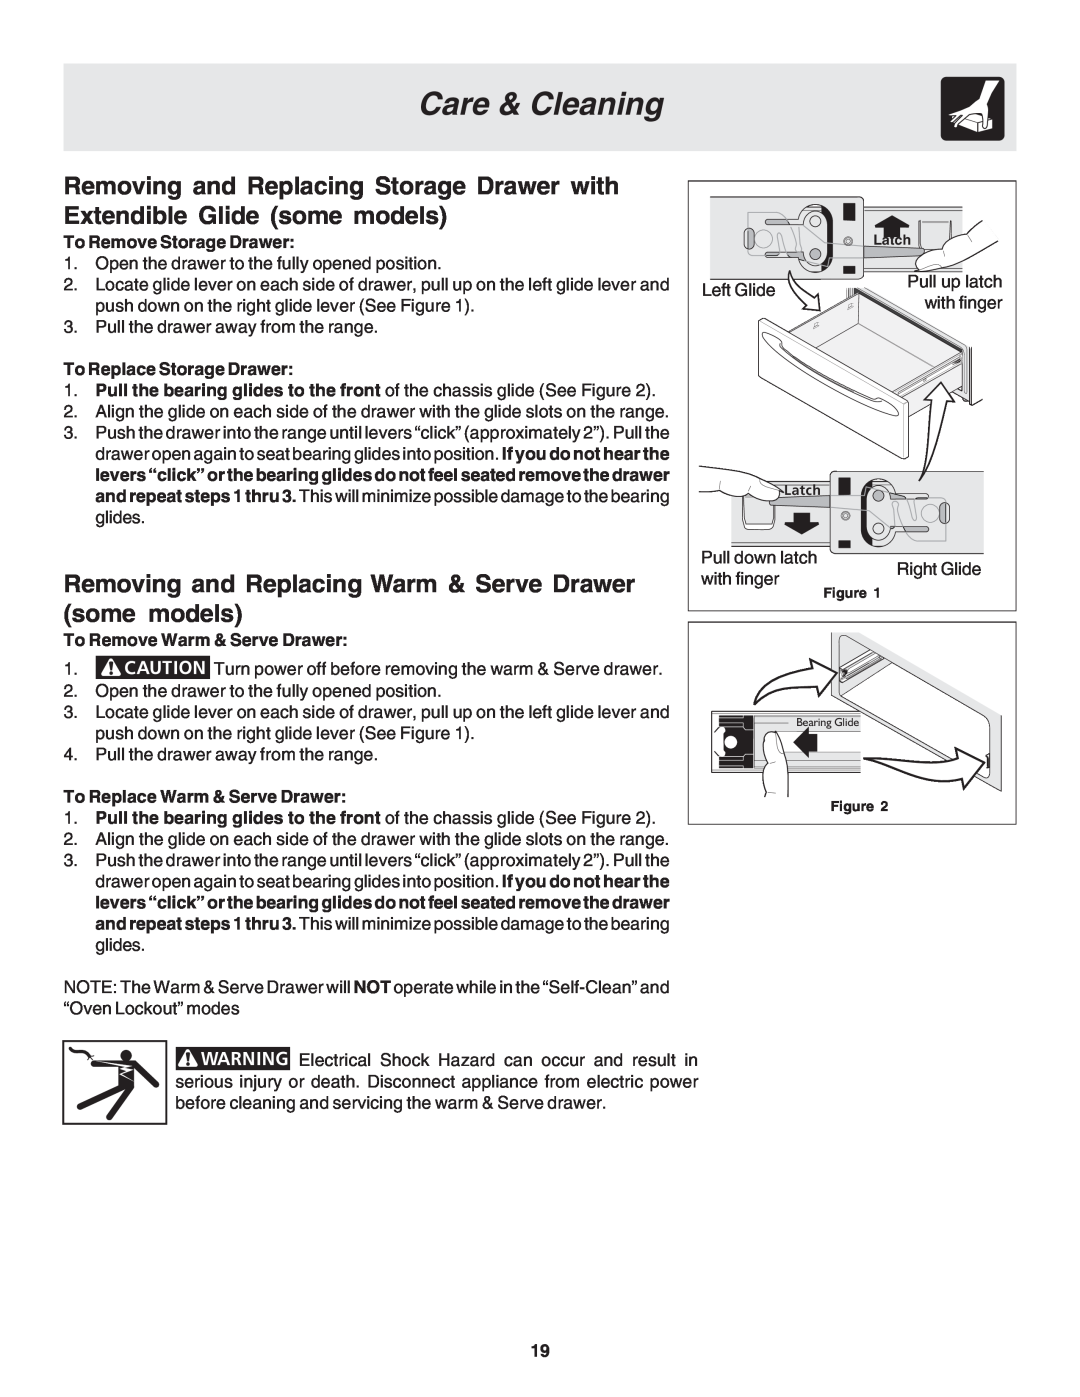 Frigidaire 318203870 Removing and Replacing Warm & Serve Drawer some models, To Remove Storage Drawer, Care & Cleaning 